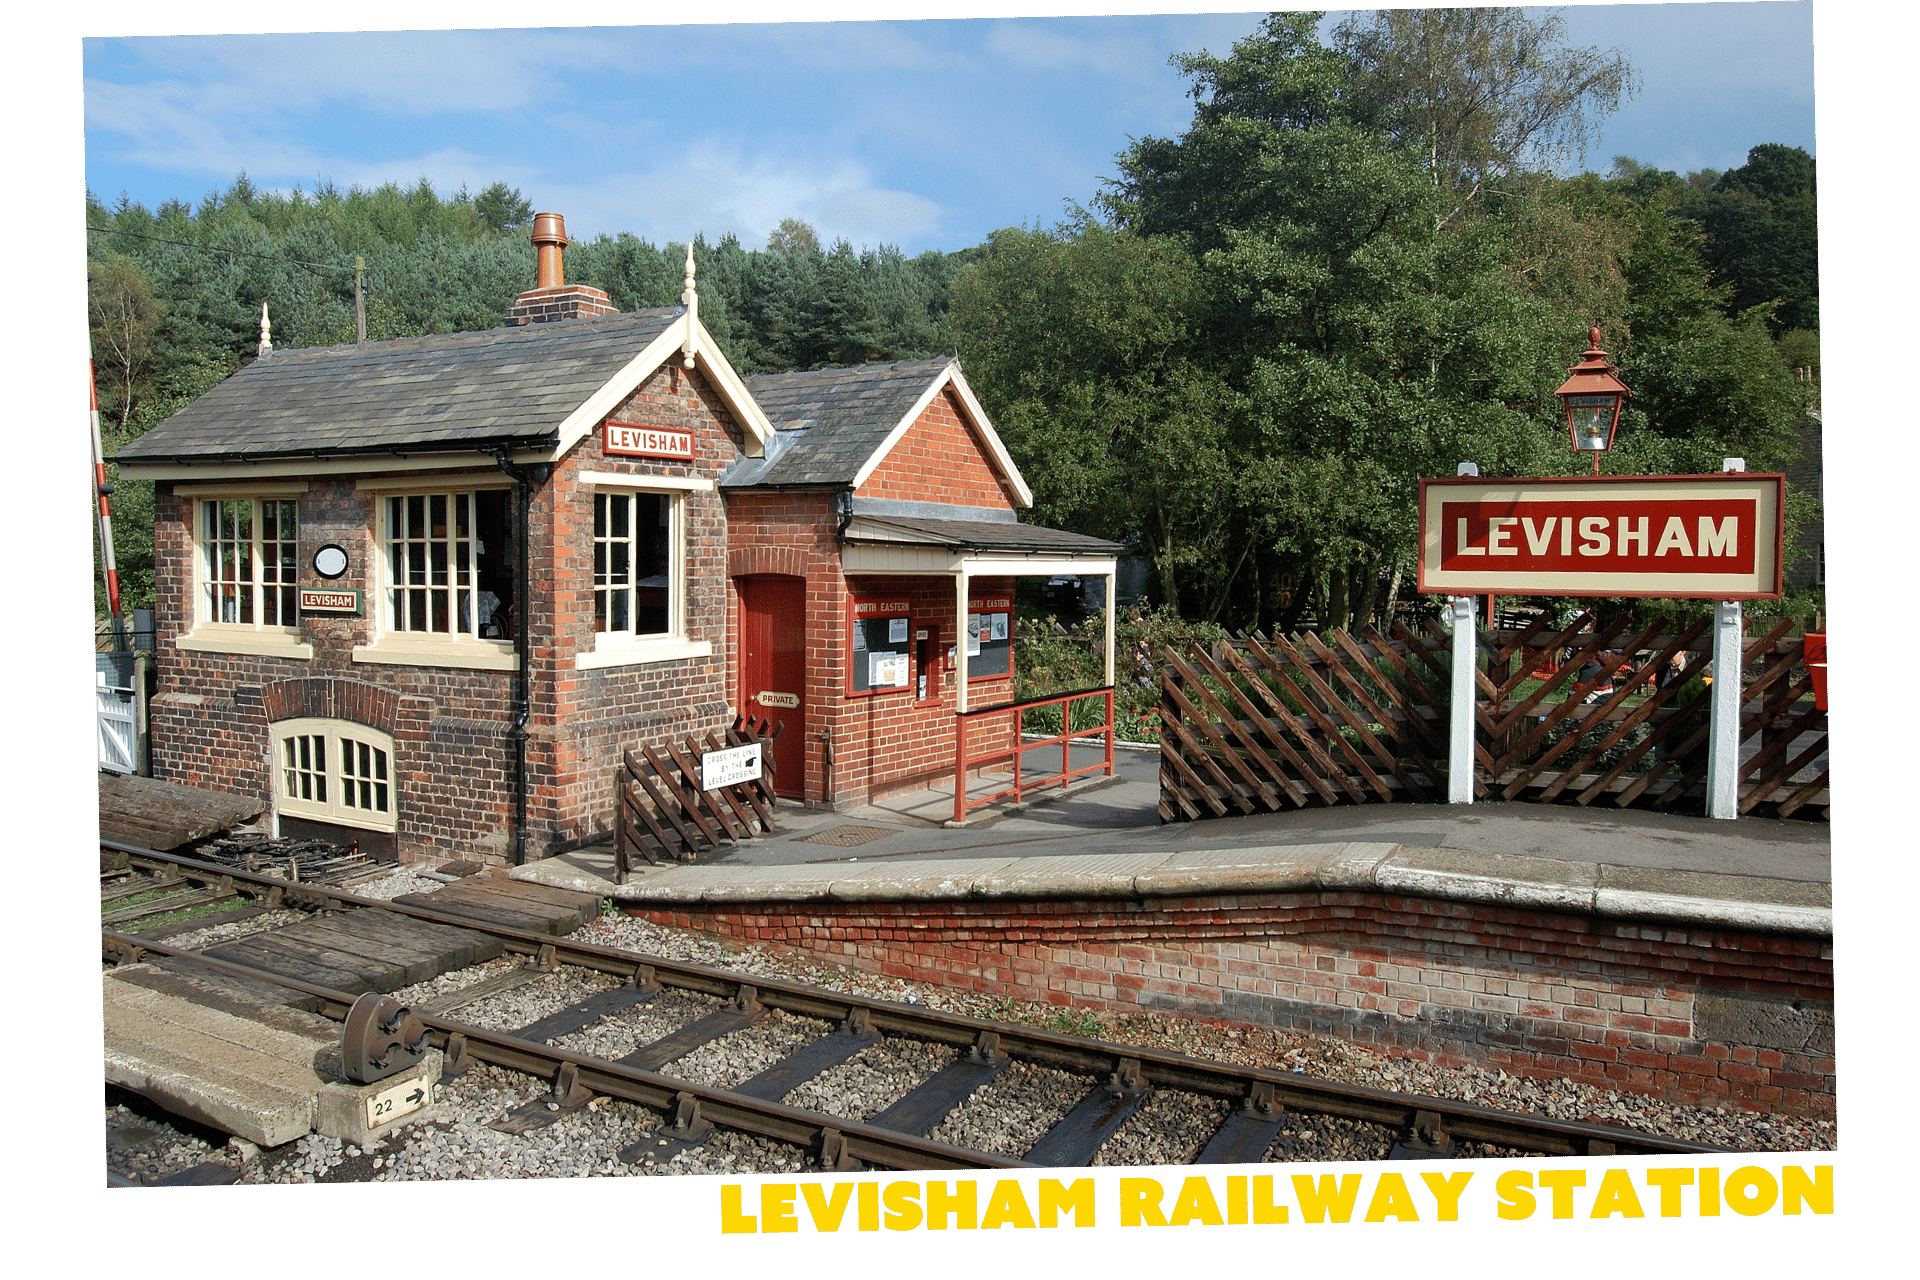 Levisham Railway Station exterior - one of the Mission Impossible 7 filming locations